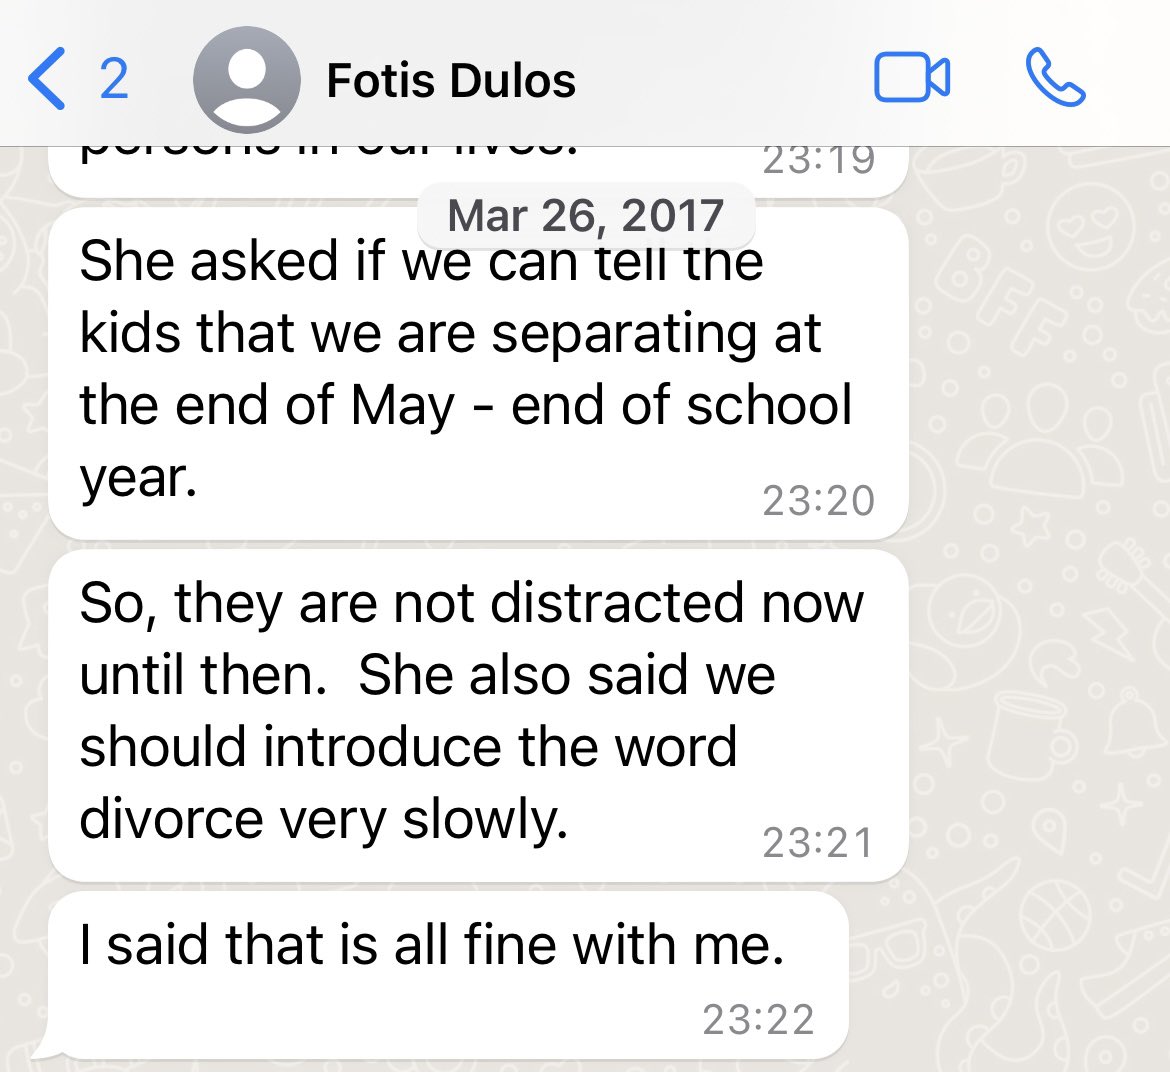 Fotis Dulos chats w Michelle Troconis shows a completely different story than what the media say. He had told Michelle that he was living separate lives-Divorce docs says “The parties marriage has broken down since 2011, but the parties continued on for the sake of the children. https://t.co/eY0mog5ULY